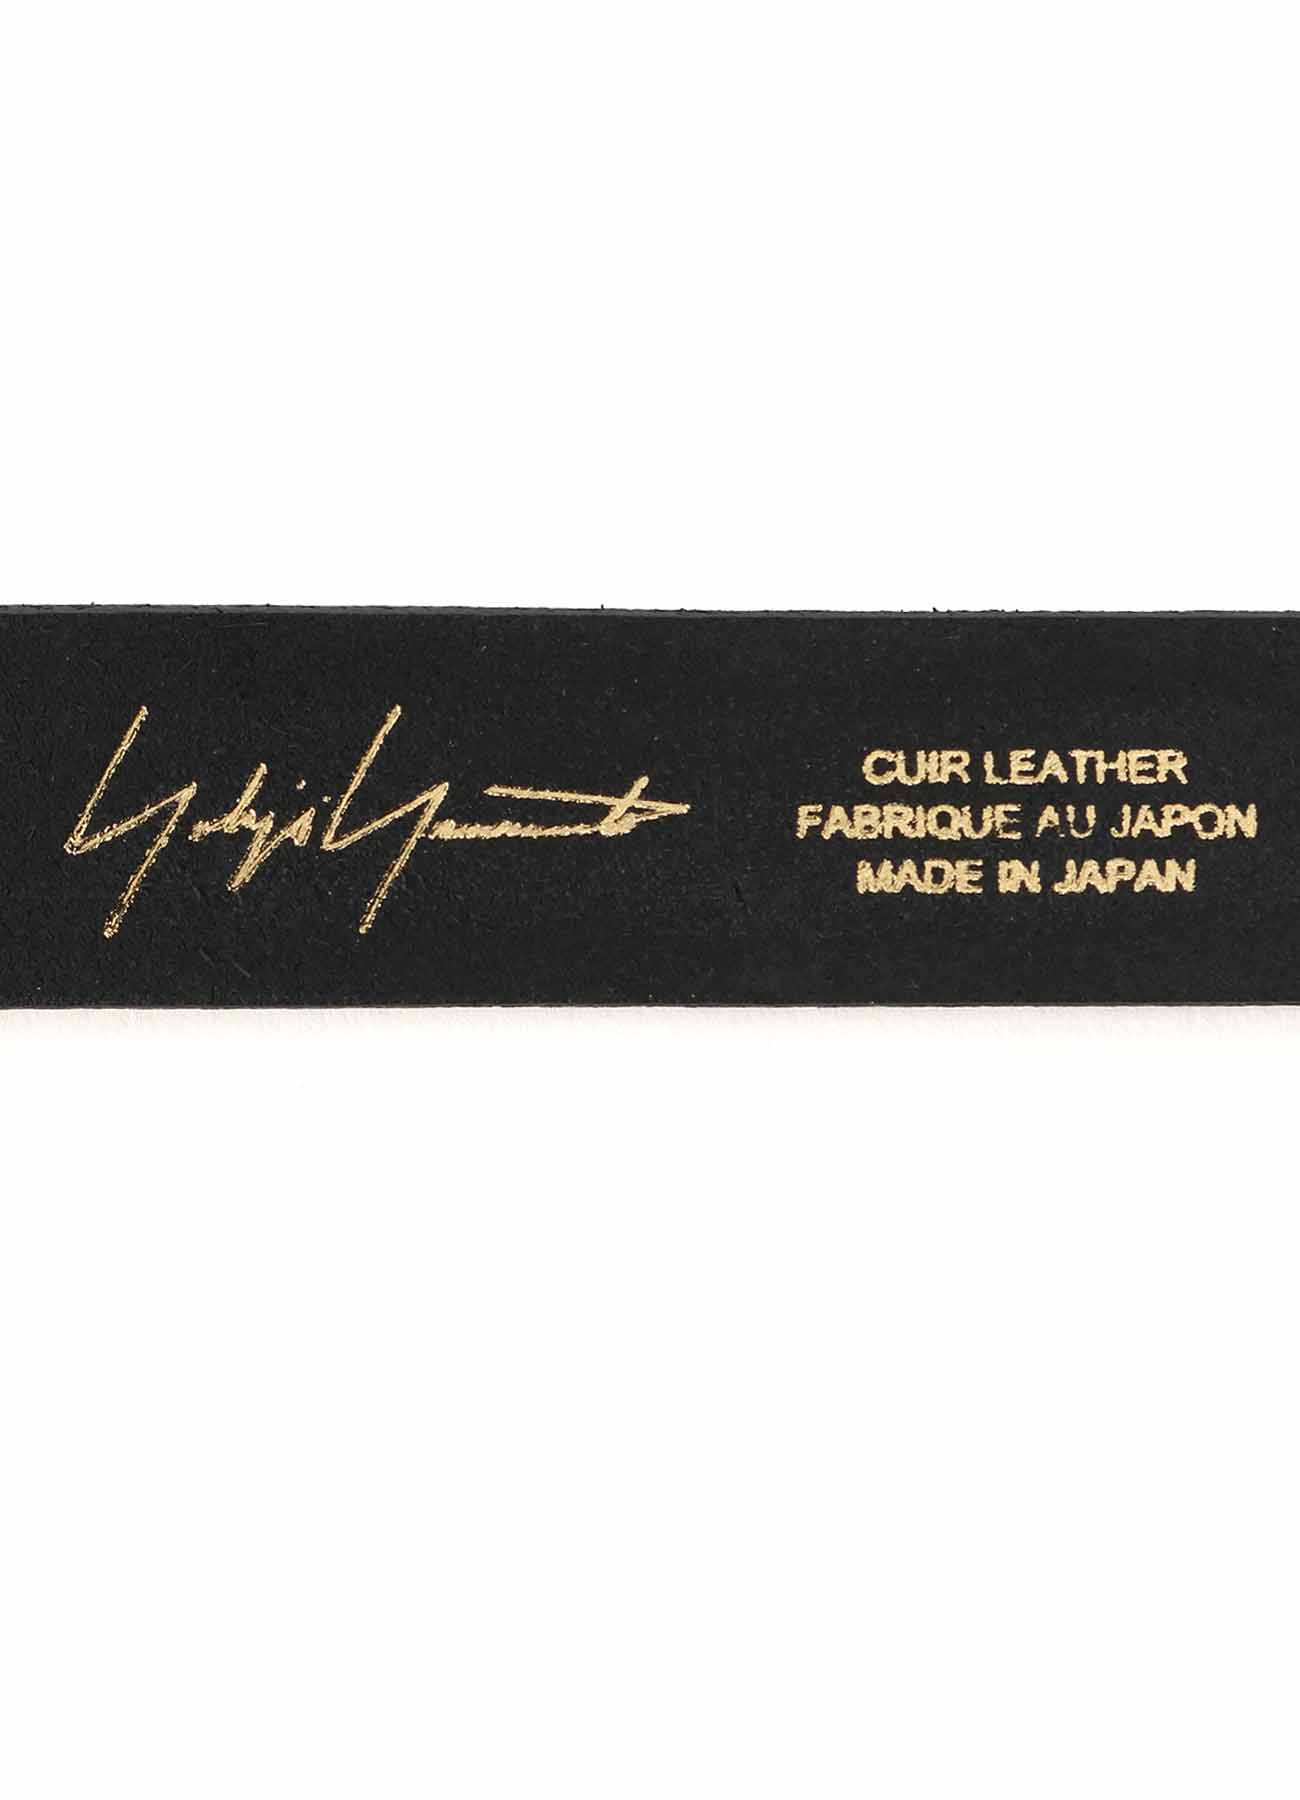 SOFT MAT OILED LEATHER 25MM FREE BELT